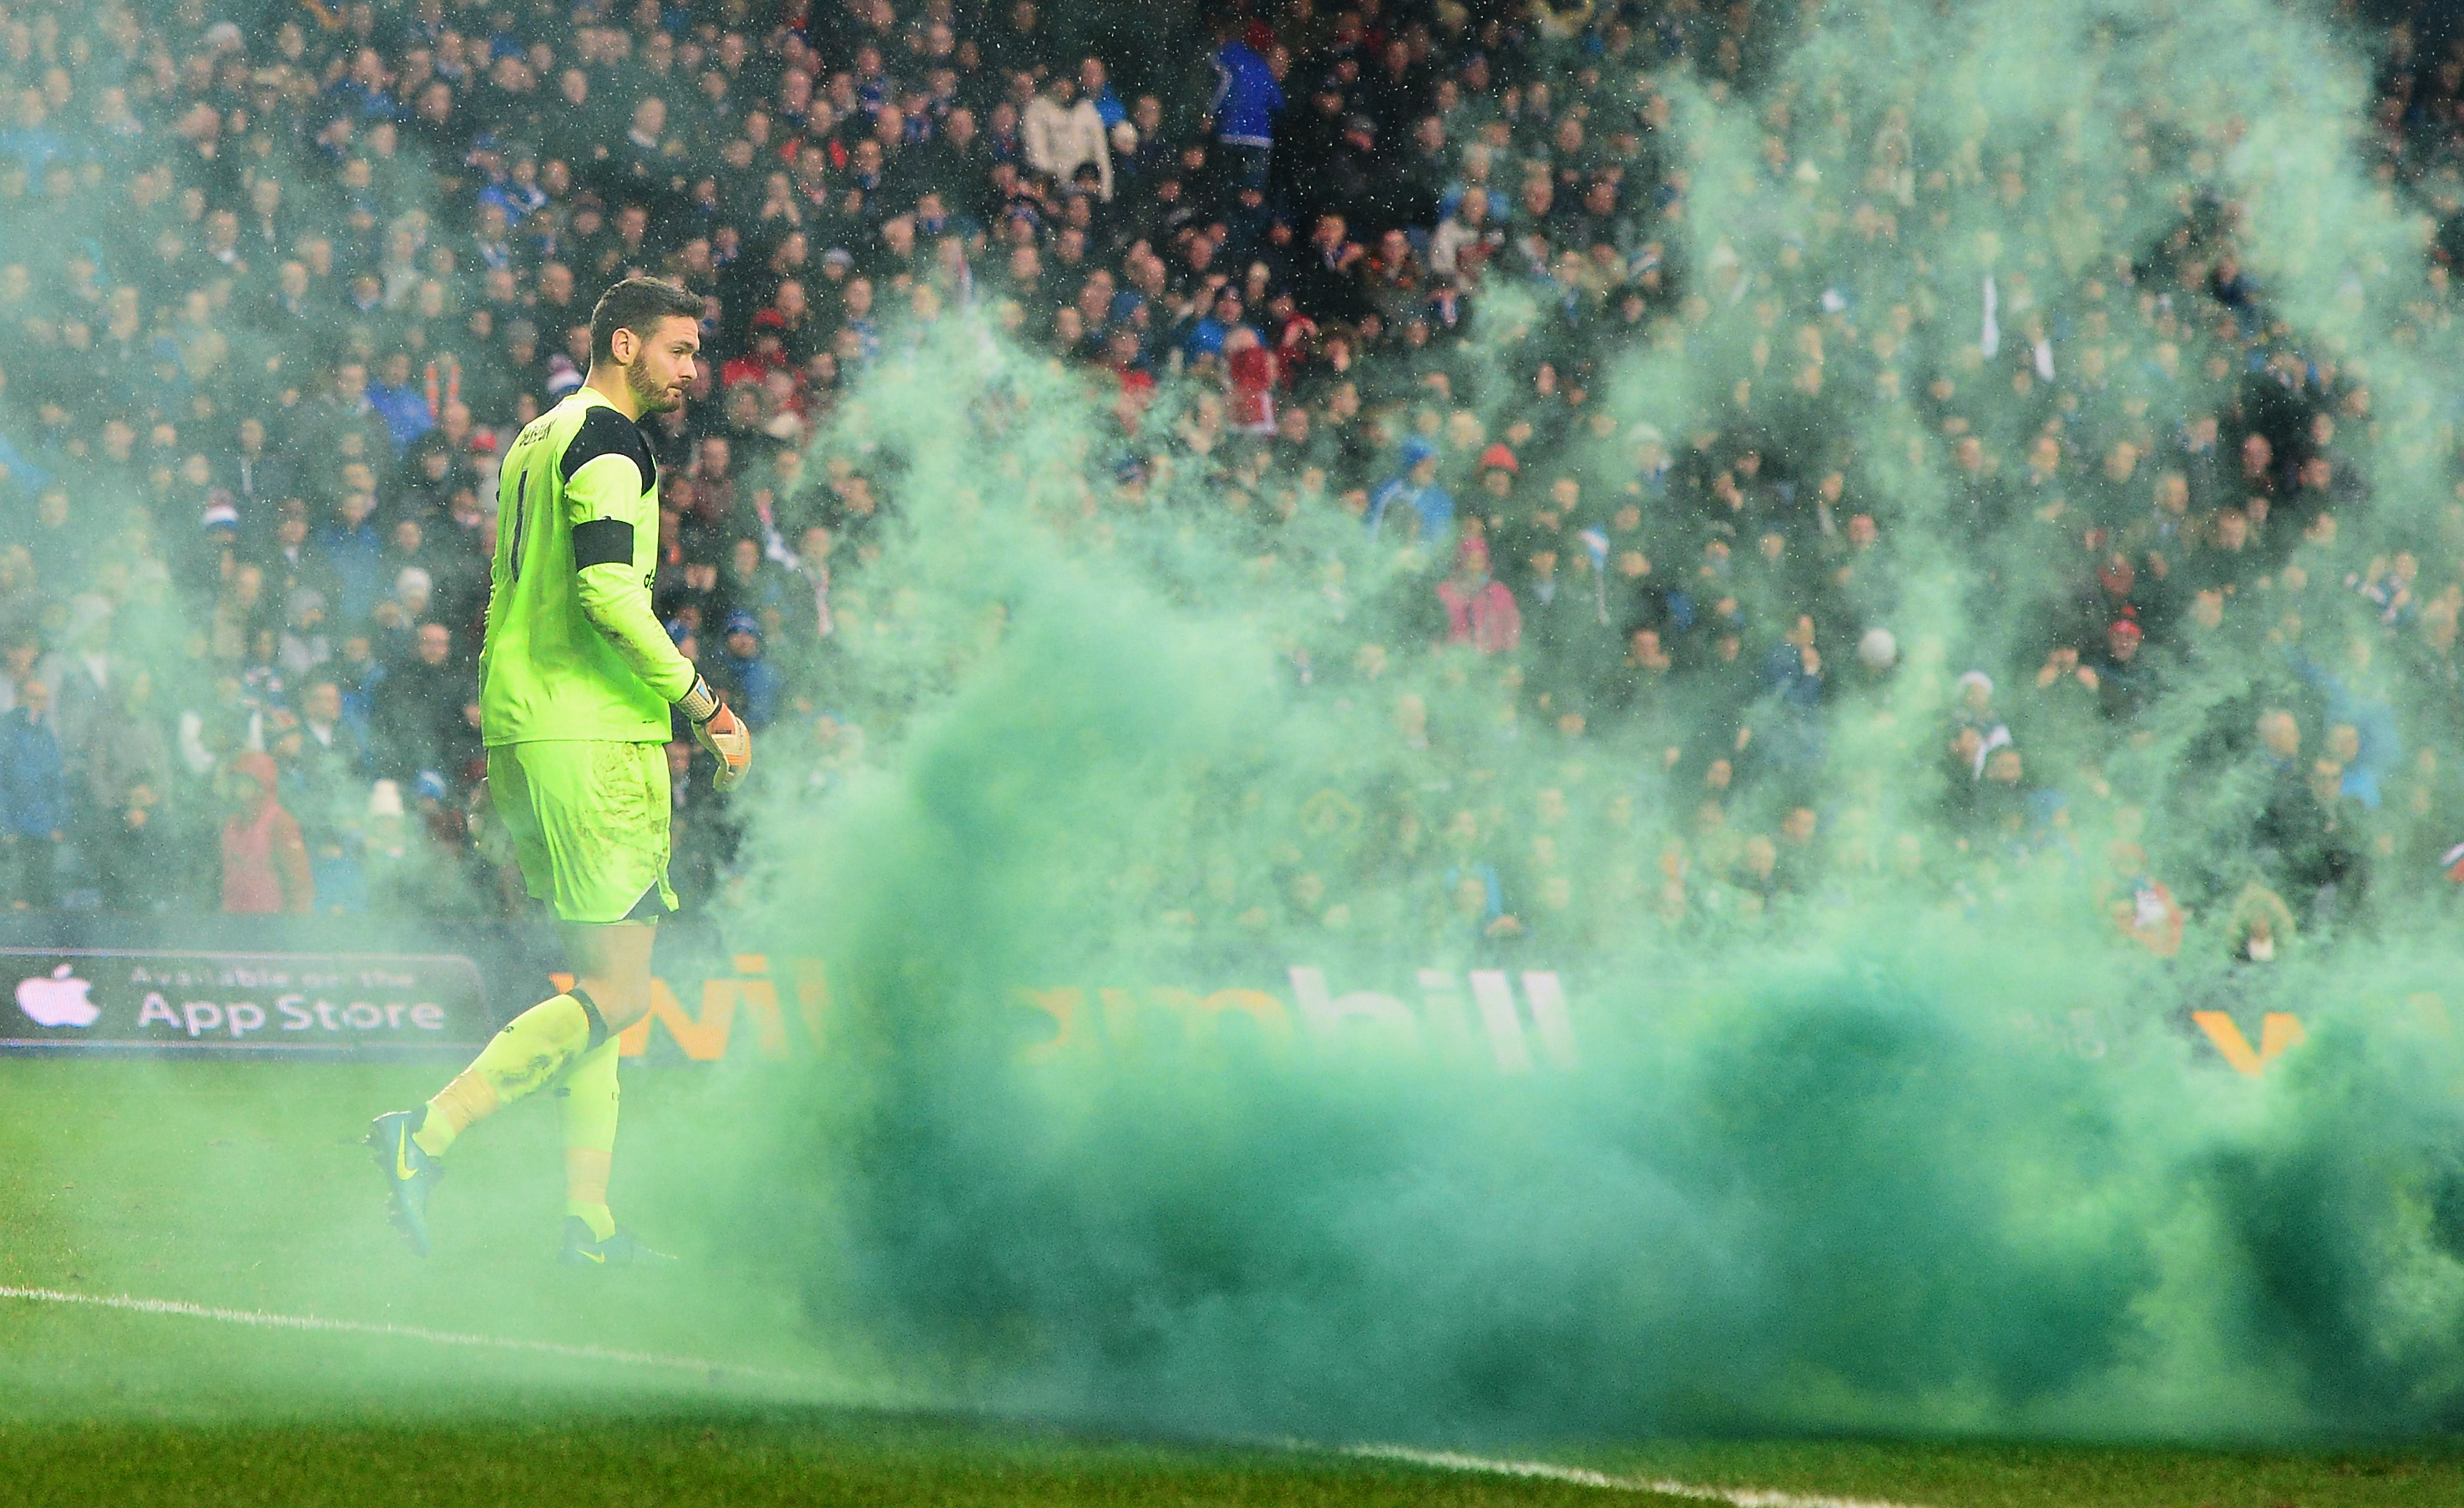 GLASGOW, SCOTLAND - DECEMBER 31:  Craig Gordon of Celtic walks among smokes as a flare is thrown in after Celtic's first goal during the Ladbrokes Scottish Premiership match between Rangers and Celtic at Ibrox Stadium on December 31, 2016 in Glasgow, Scotland.  (Photo by Mark Runnacles/Getty Images)